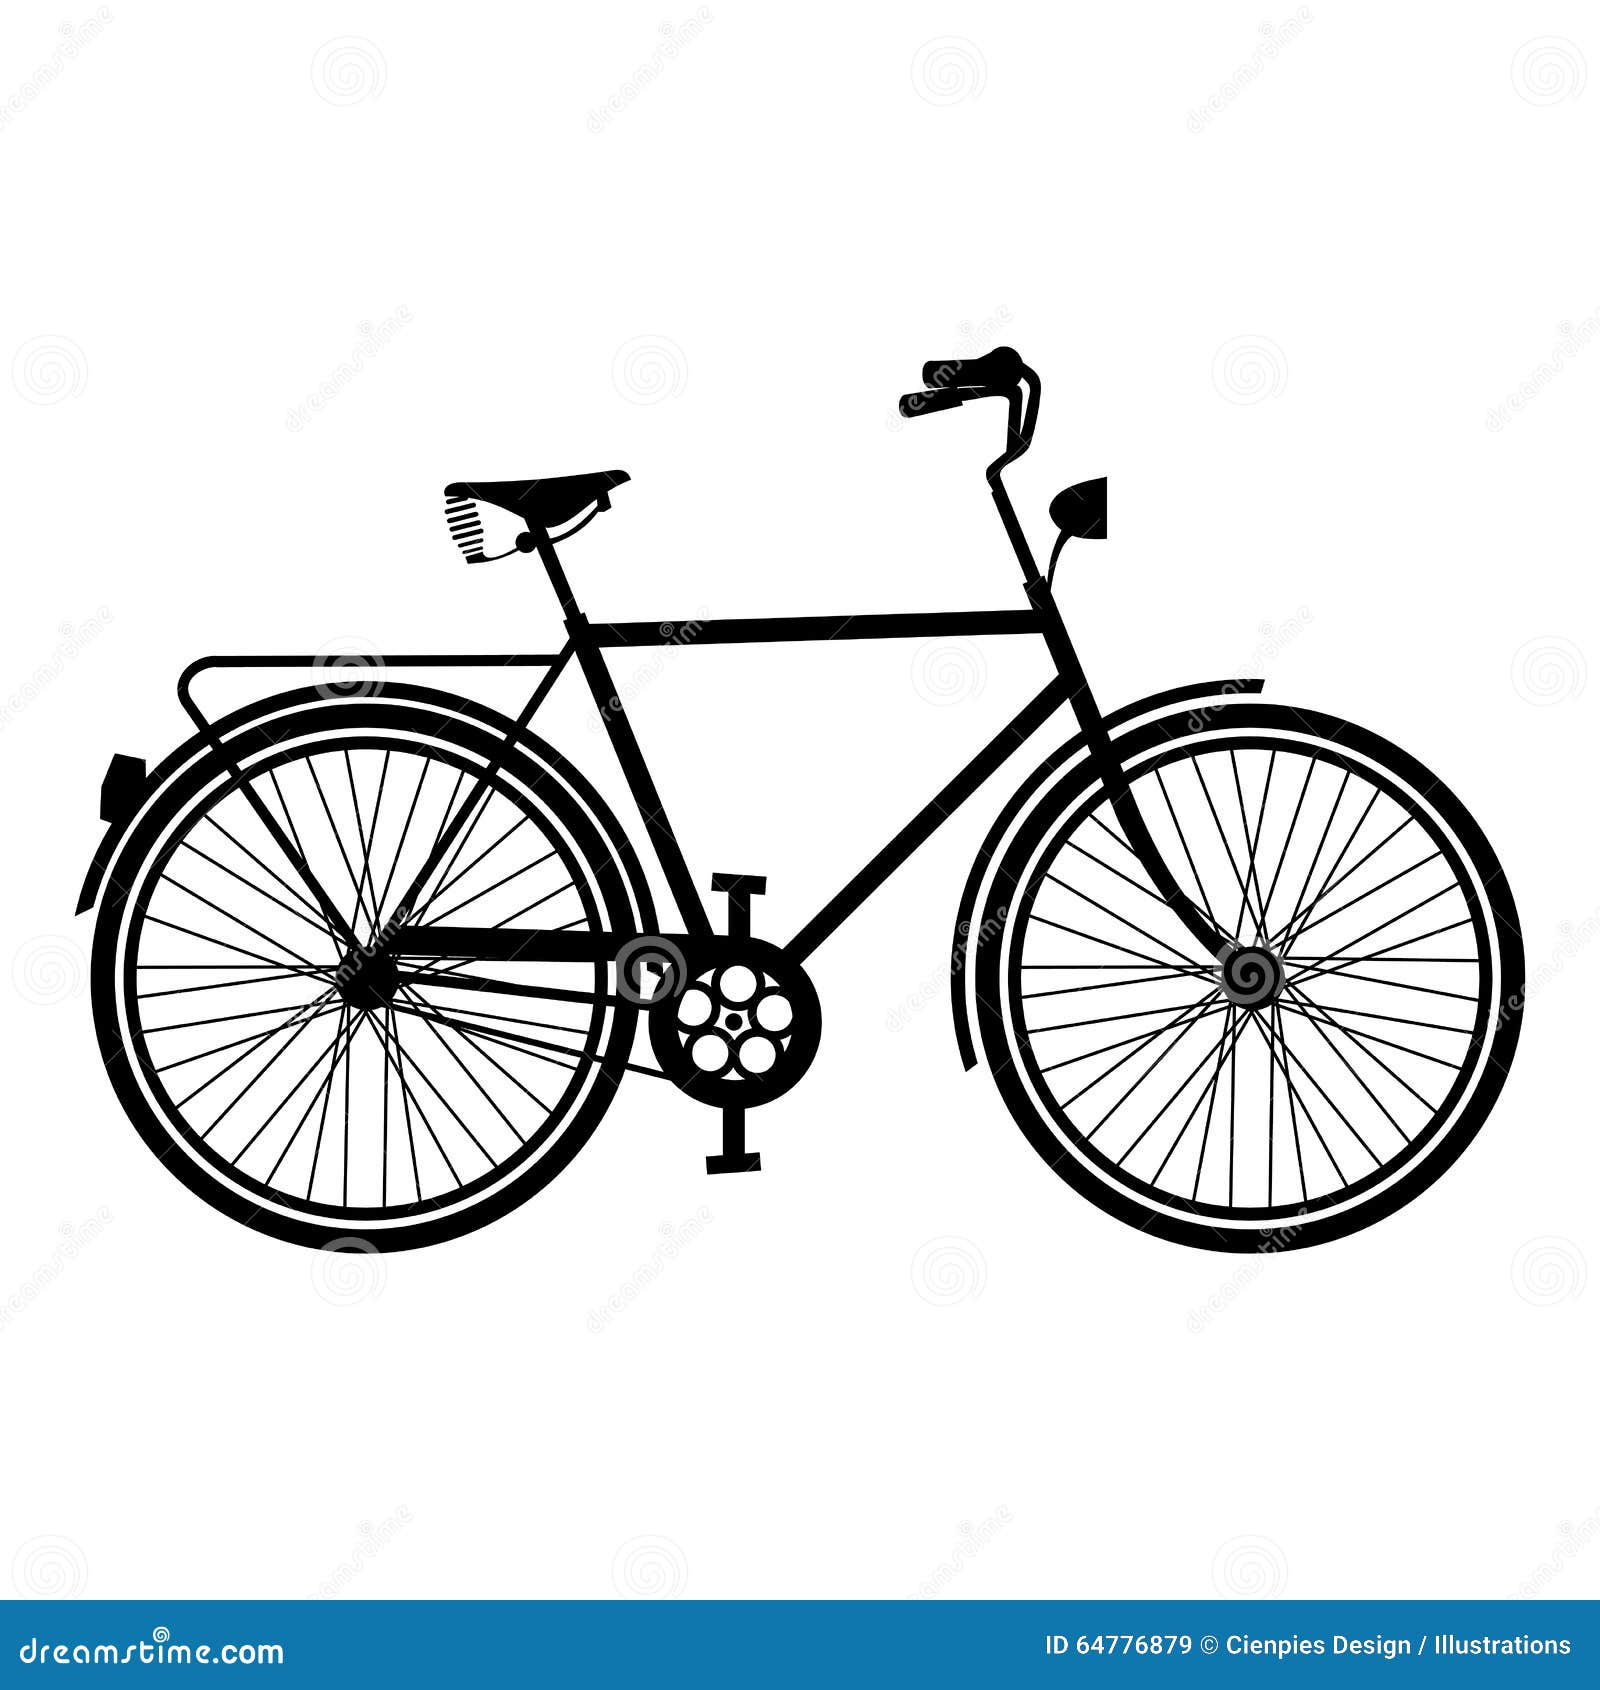 Download Vintage Bike Silhouette Isolated Bicycle Stock Vector ...